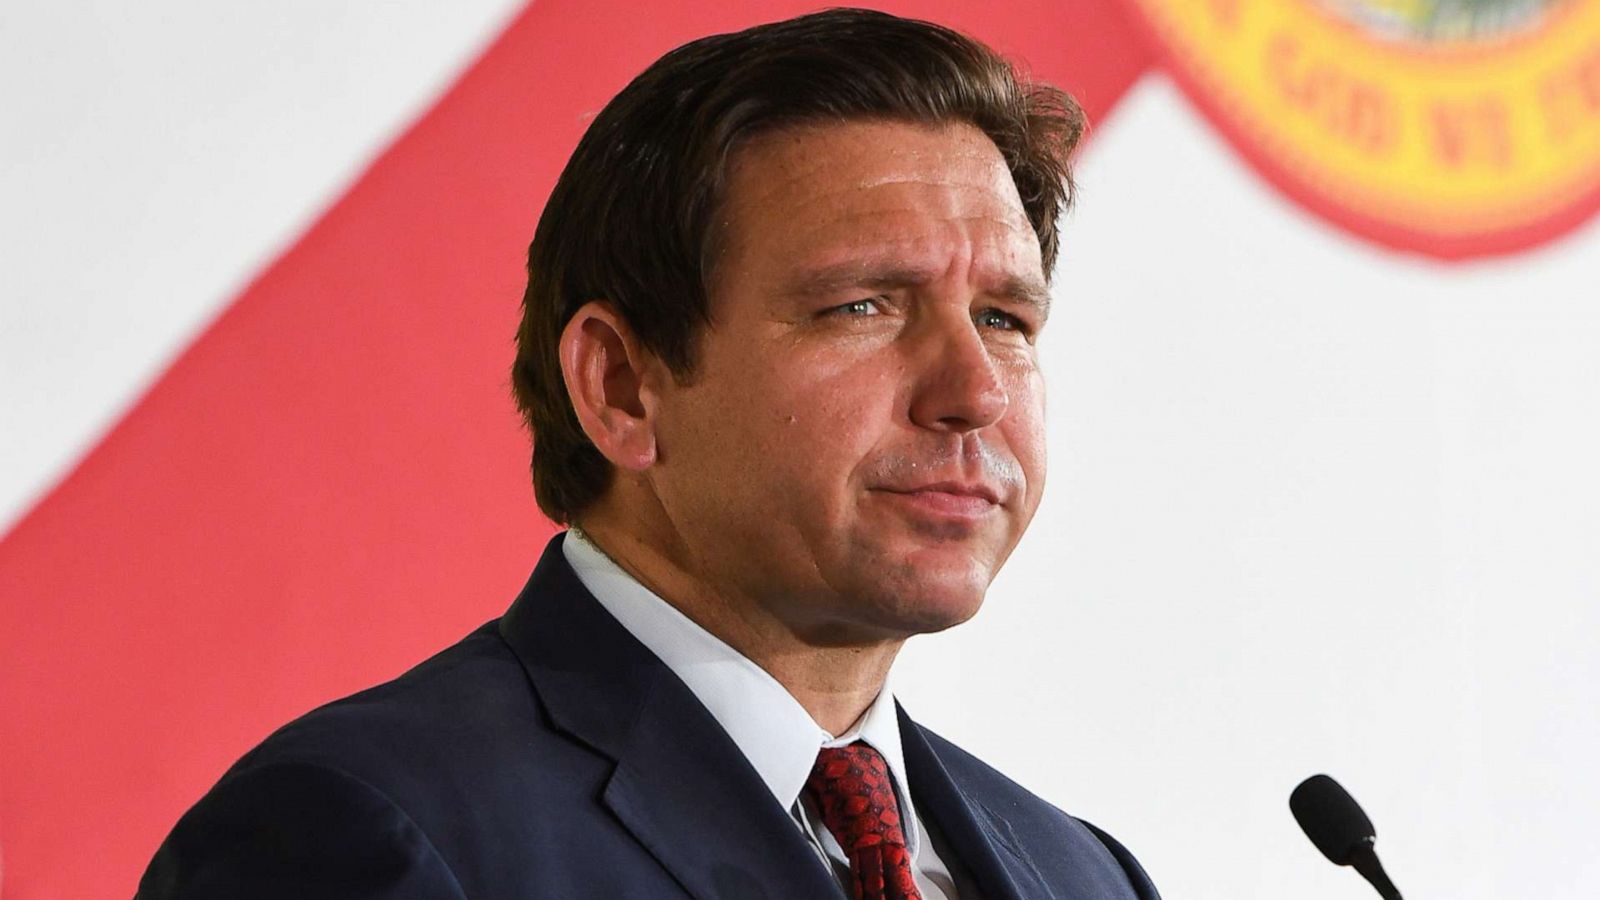 Why did Ron DeSantis completely flip his position in a day on Ukraine? MONEY.